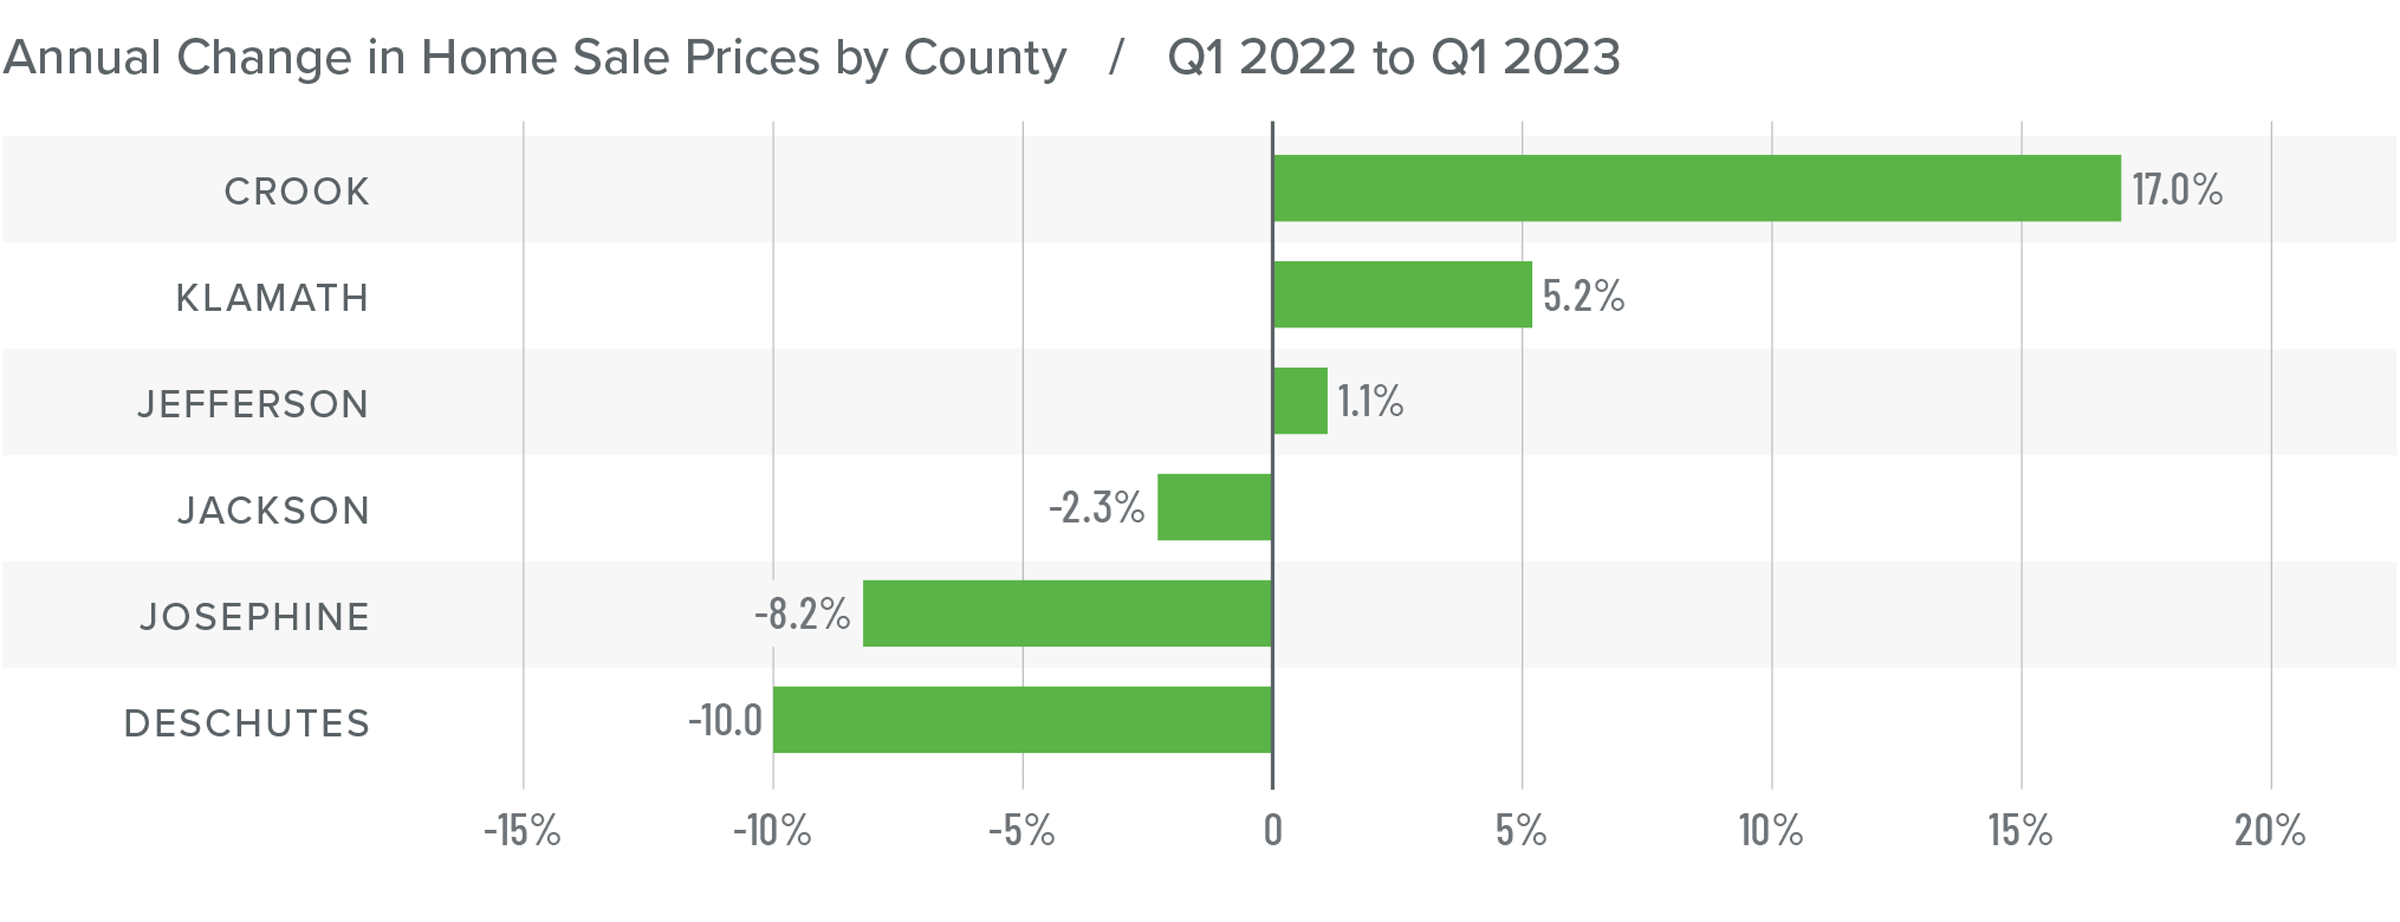 A bar graph showing the annual change in home sale prices for various counties in Central and Southern Oregon from Q1 2022 to Q1 2023. Crook County tops the list at 17%, followed by Klamath at 5.2%, Jefferson at 1.1%, Jackson at -2.3%, Josephine at -8.2%, and Deschutes at -10%.